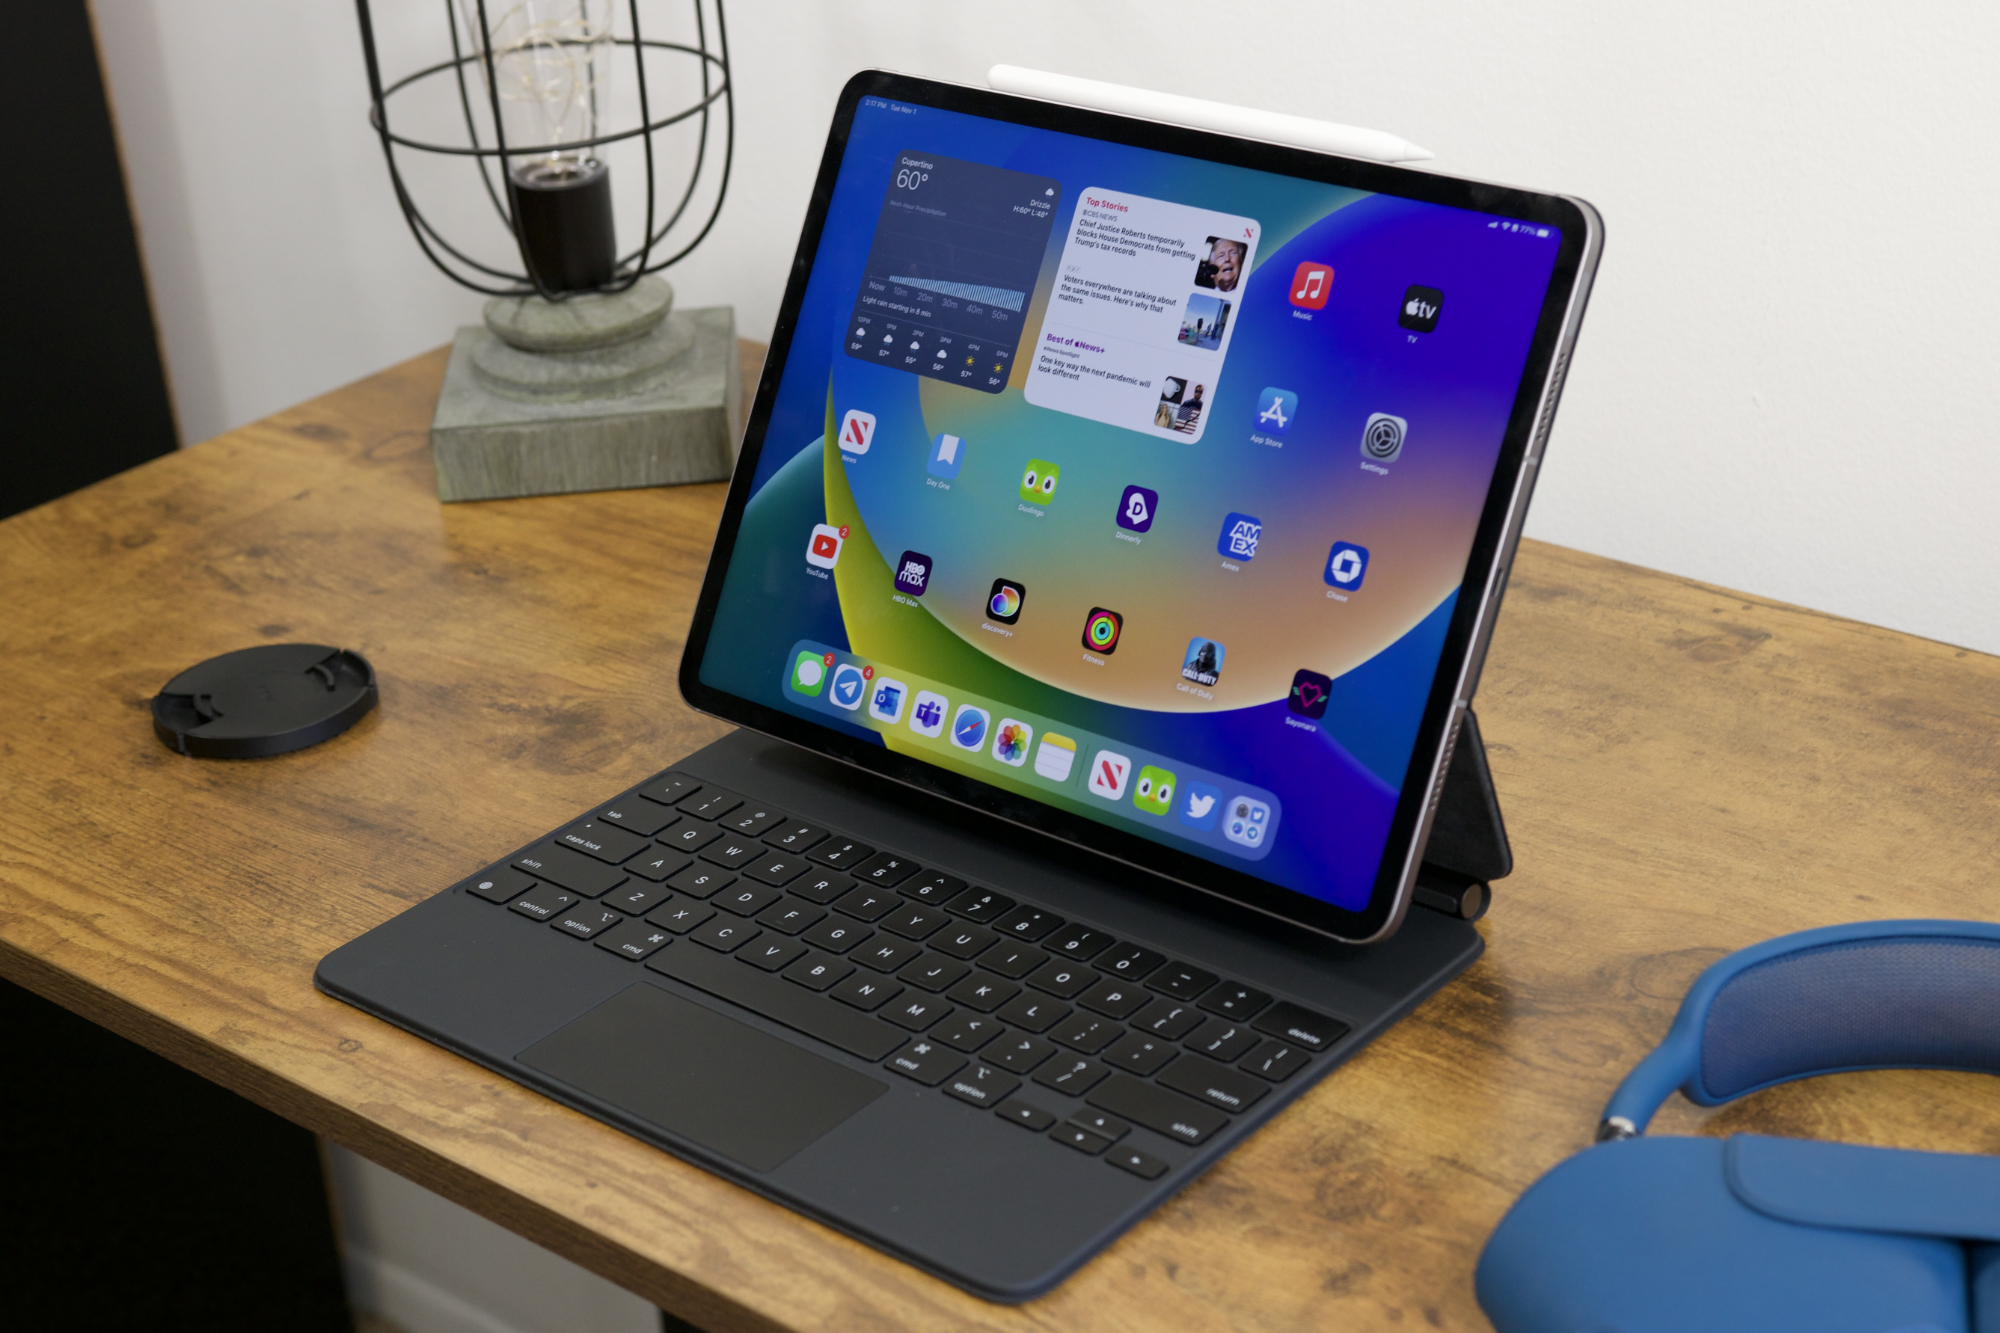 Apple Will Not Launch The 14.1-Inch iPad Pro With mini-LED Display in 2023